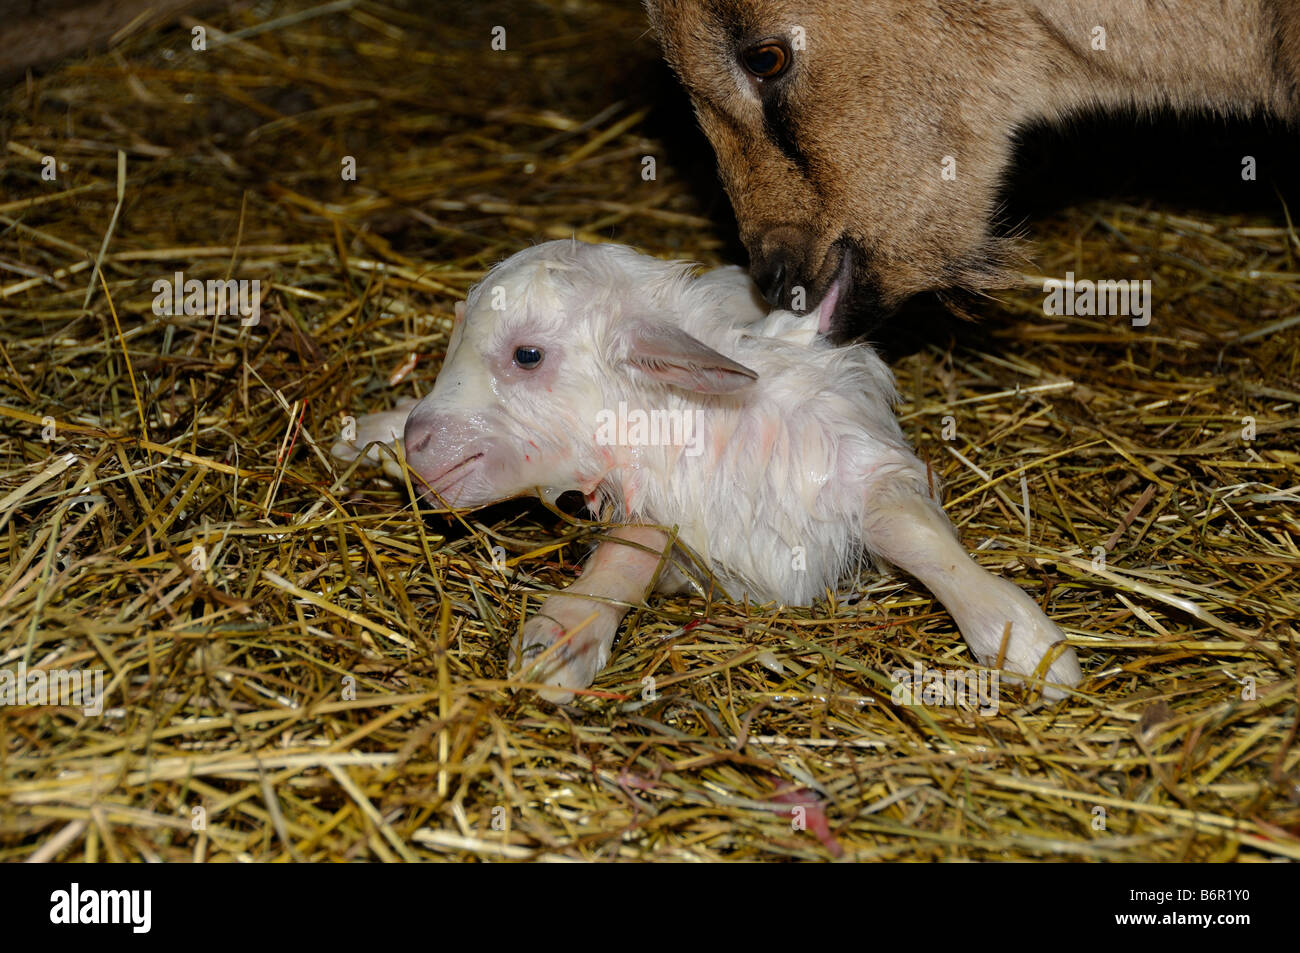 Stock photo of a newborn goat being licked clean by its mother Teh Pygmy goat had been crossed with a Saanen goat Stock Photo